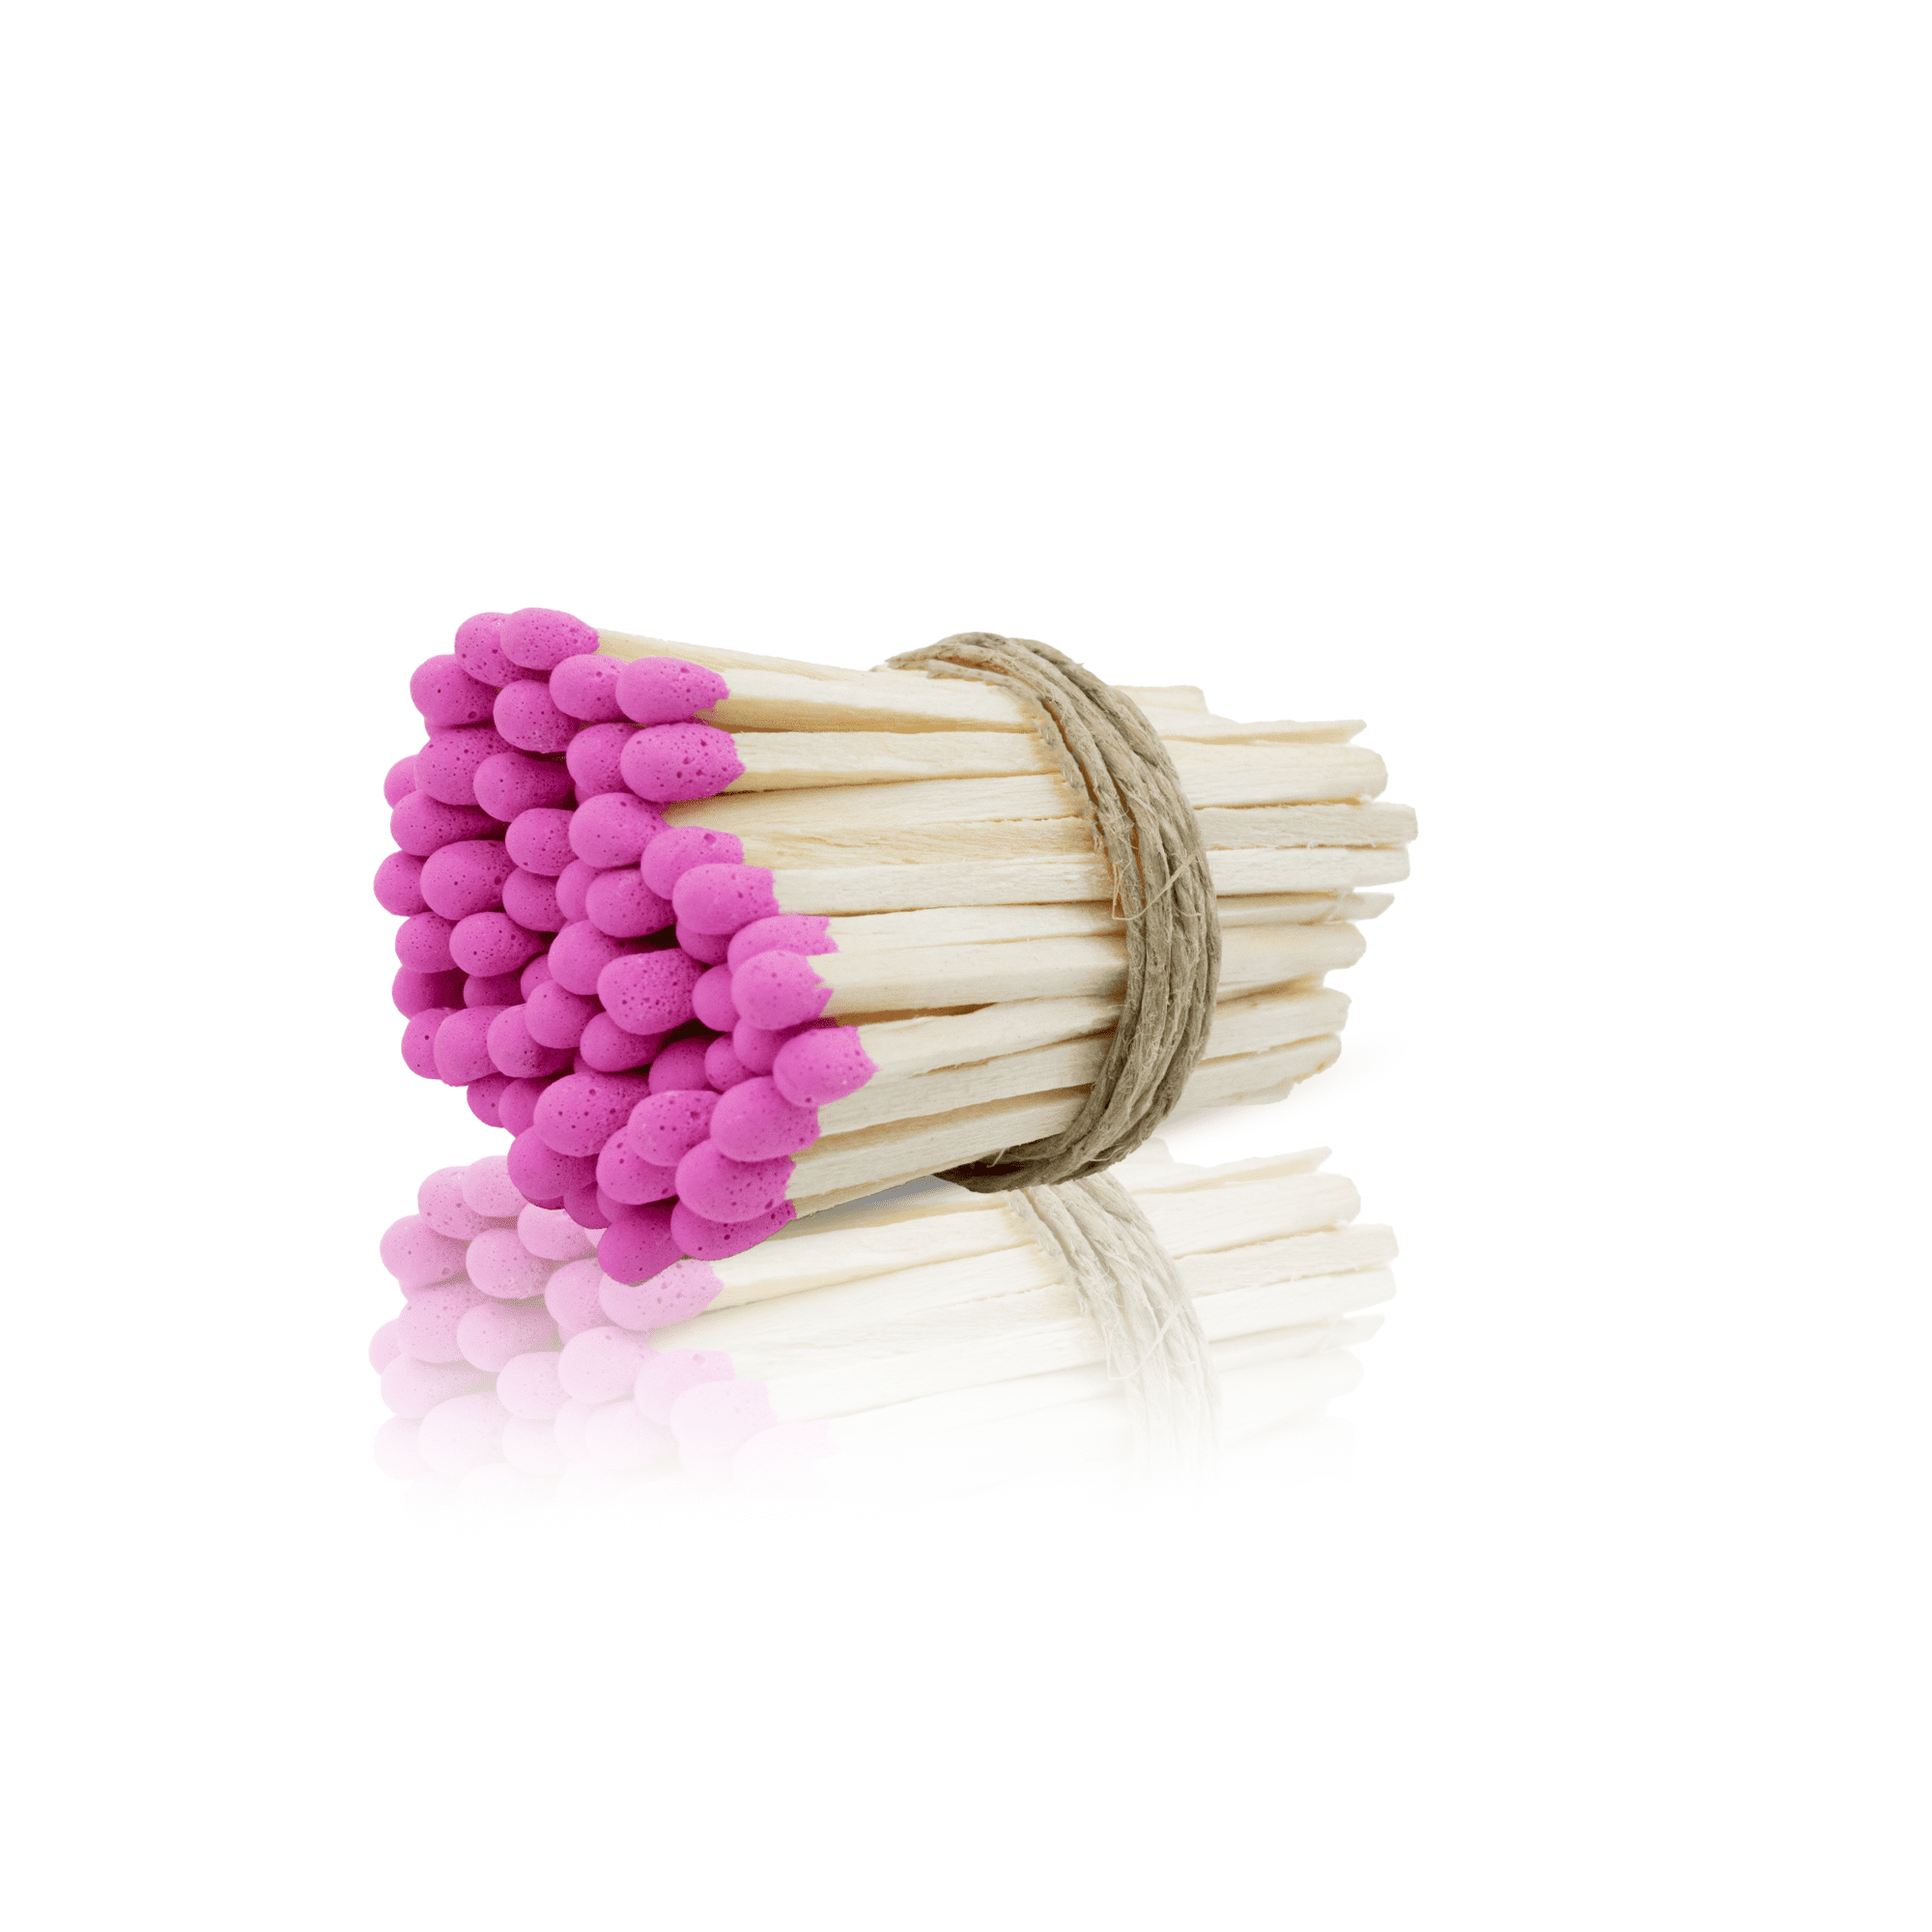 Close-up Macro of Pink Wood Stick Matches in a Box Stock Image